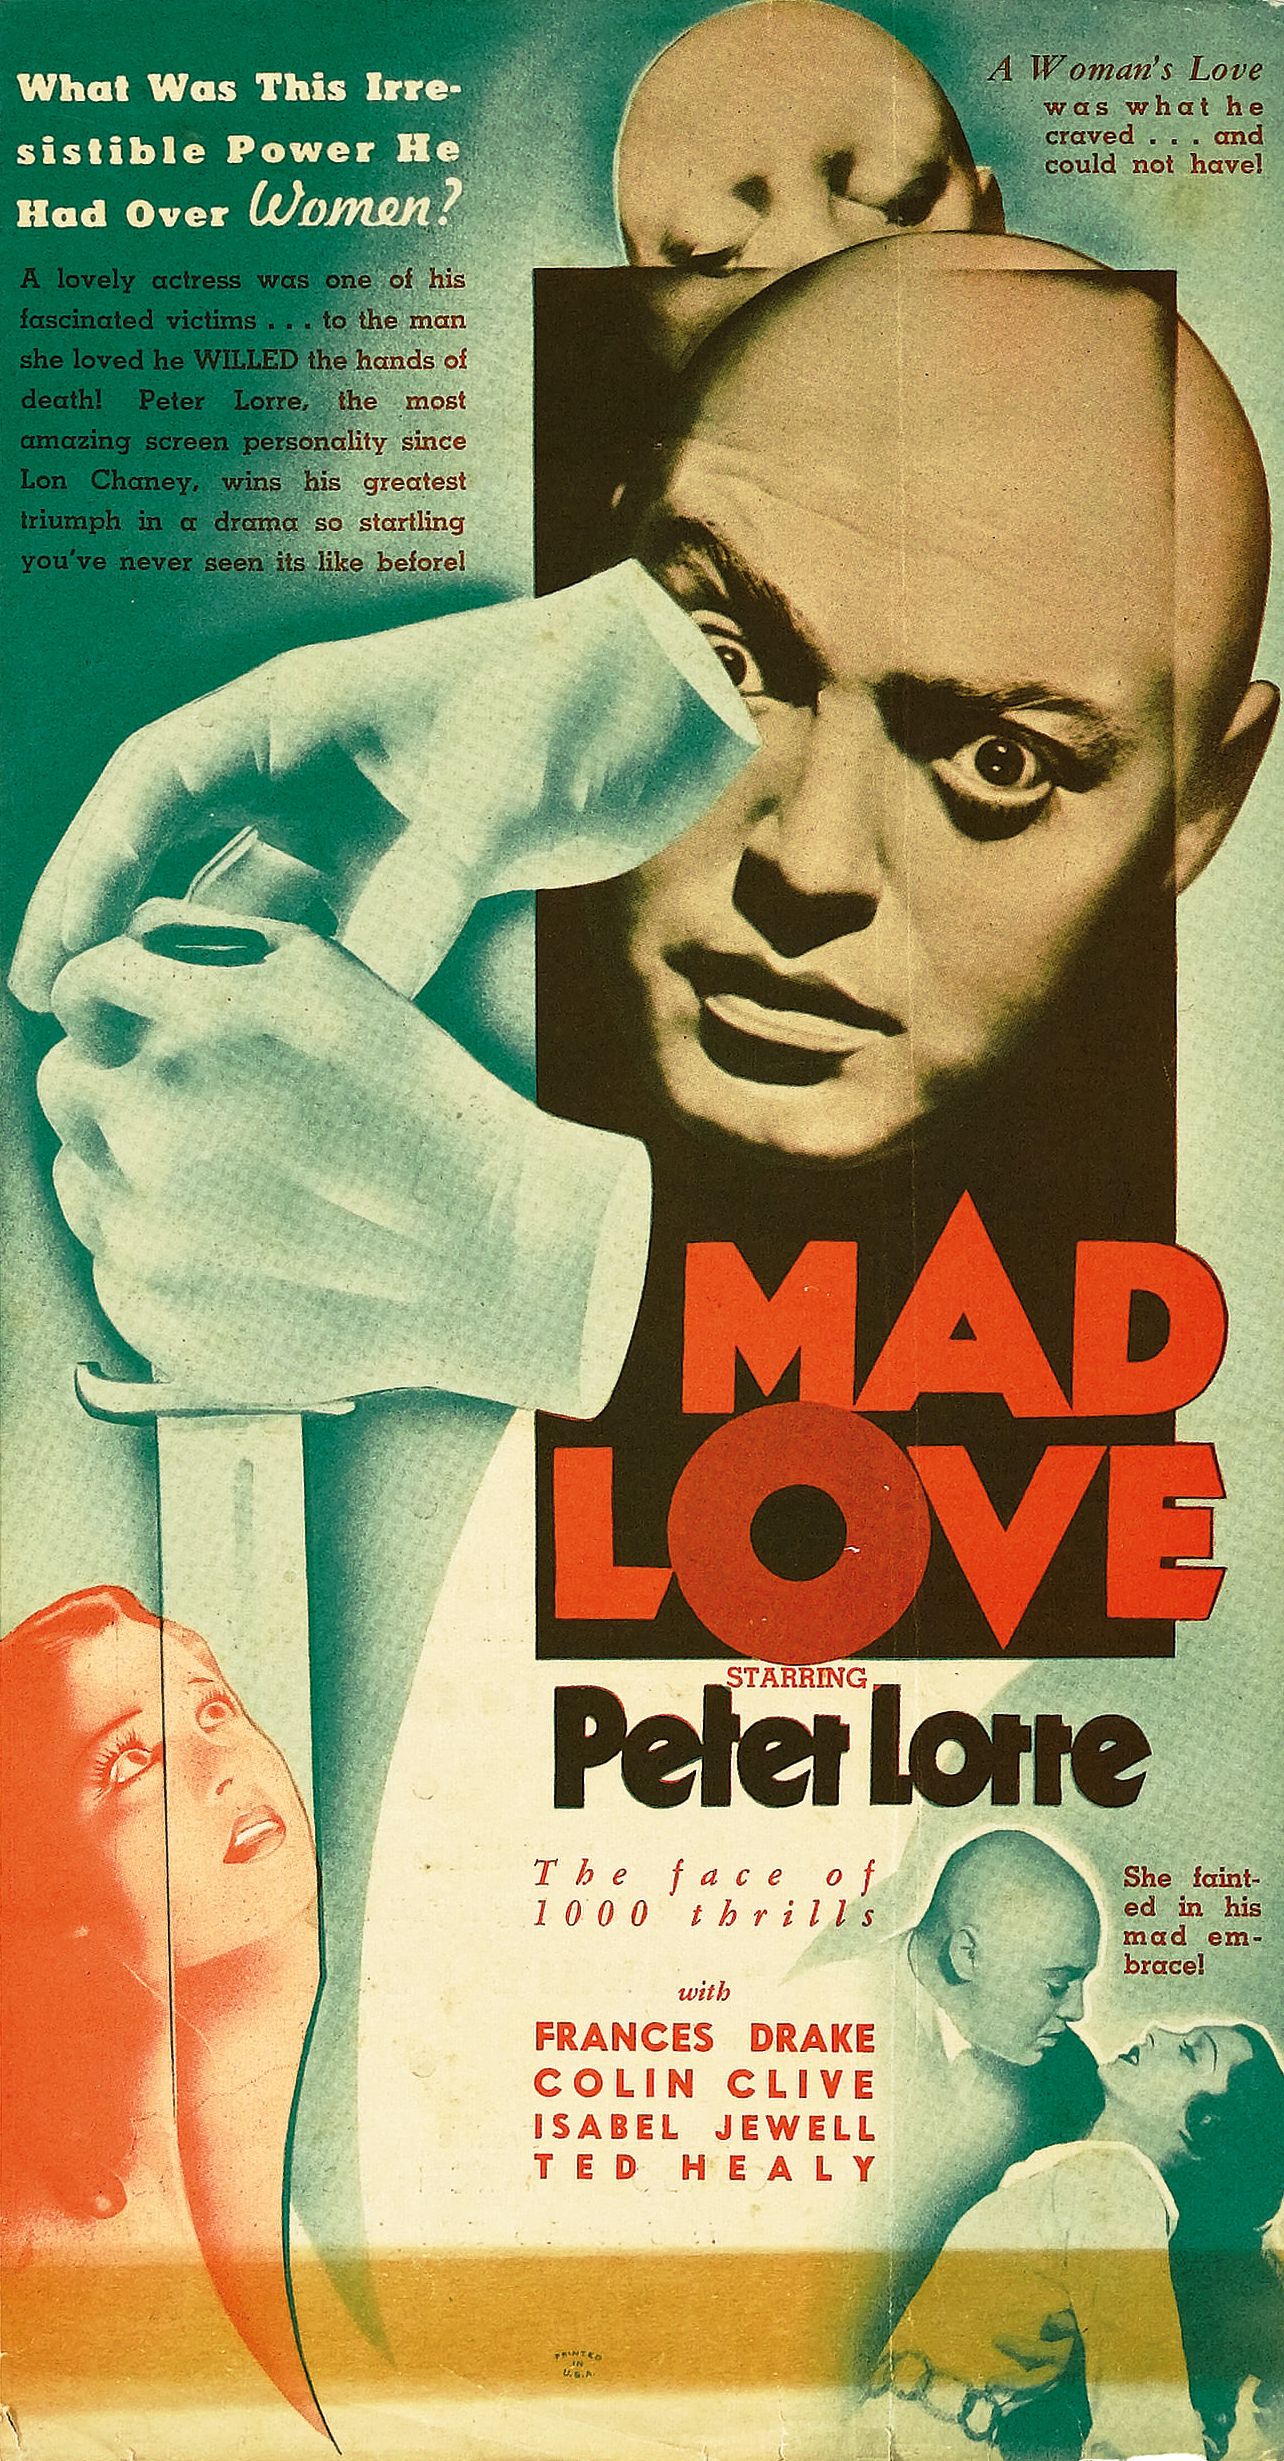 Peter Lorre is obsessed